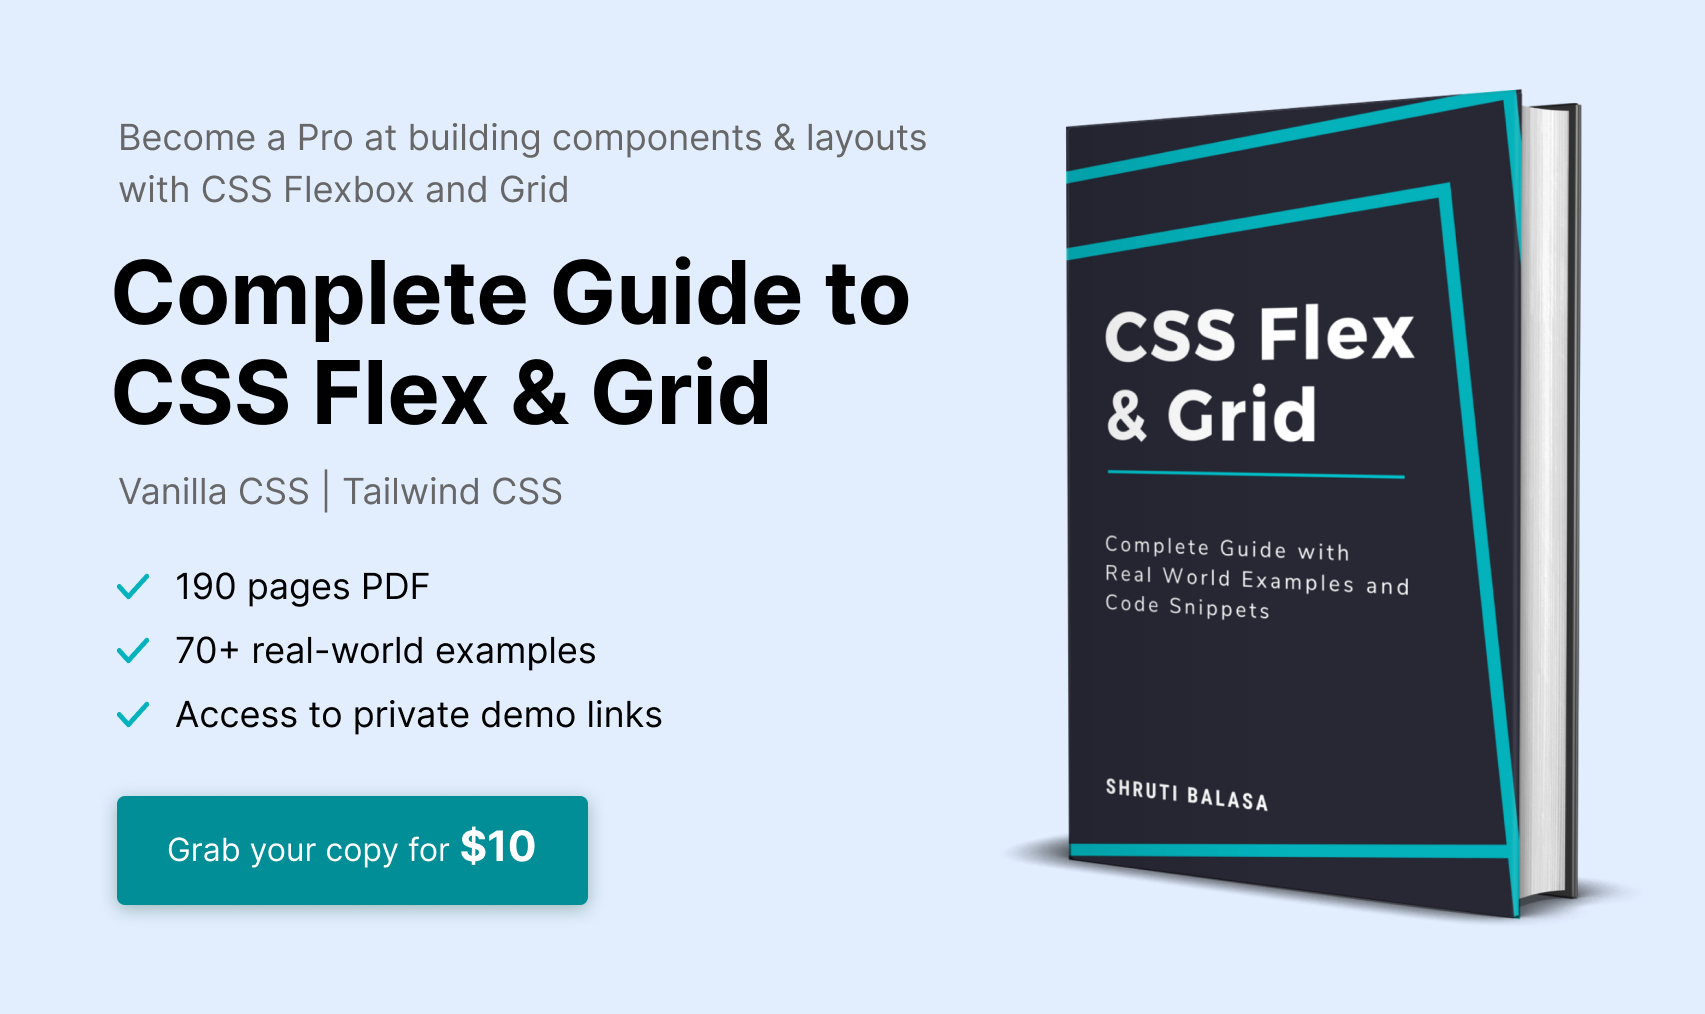 Book Complete Guide to CSS Flex & Grid